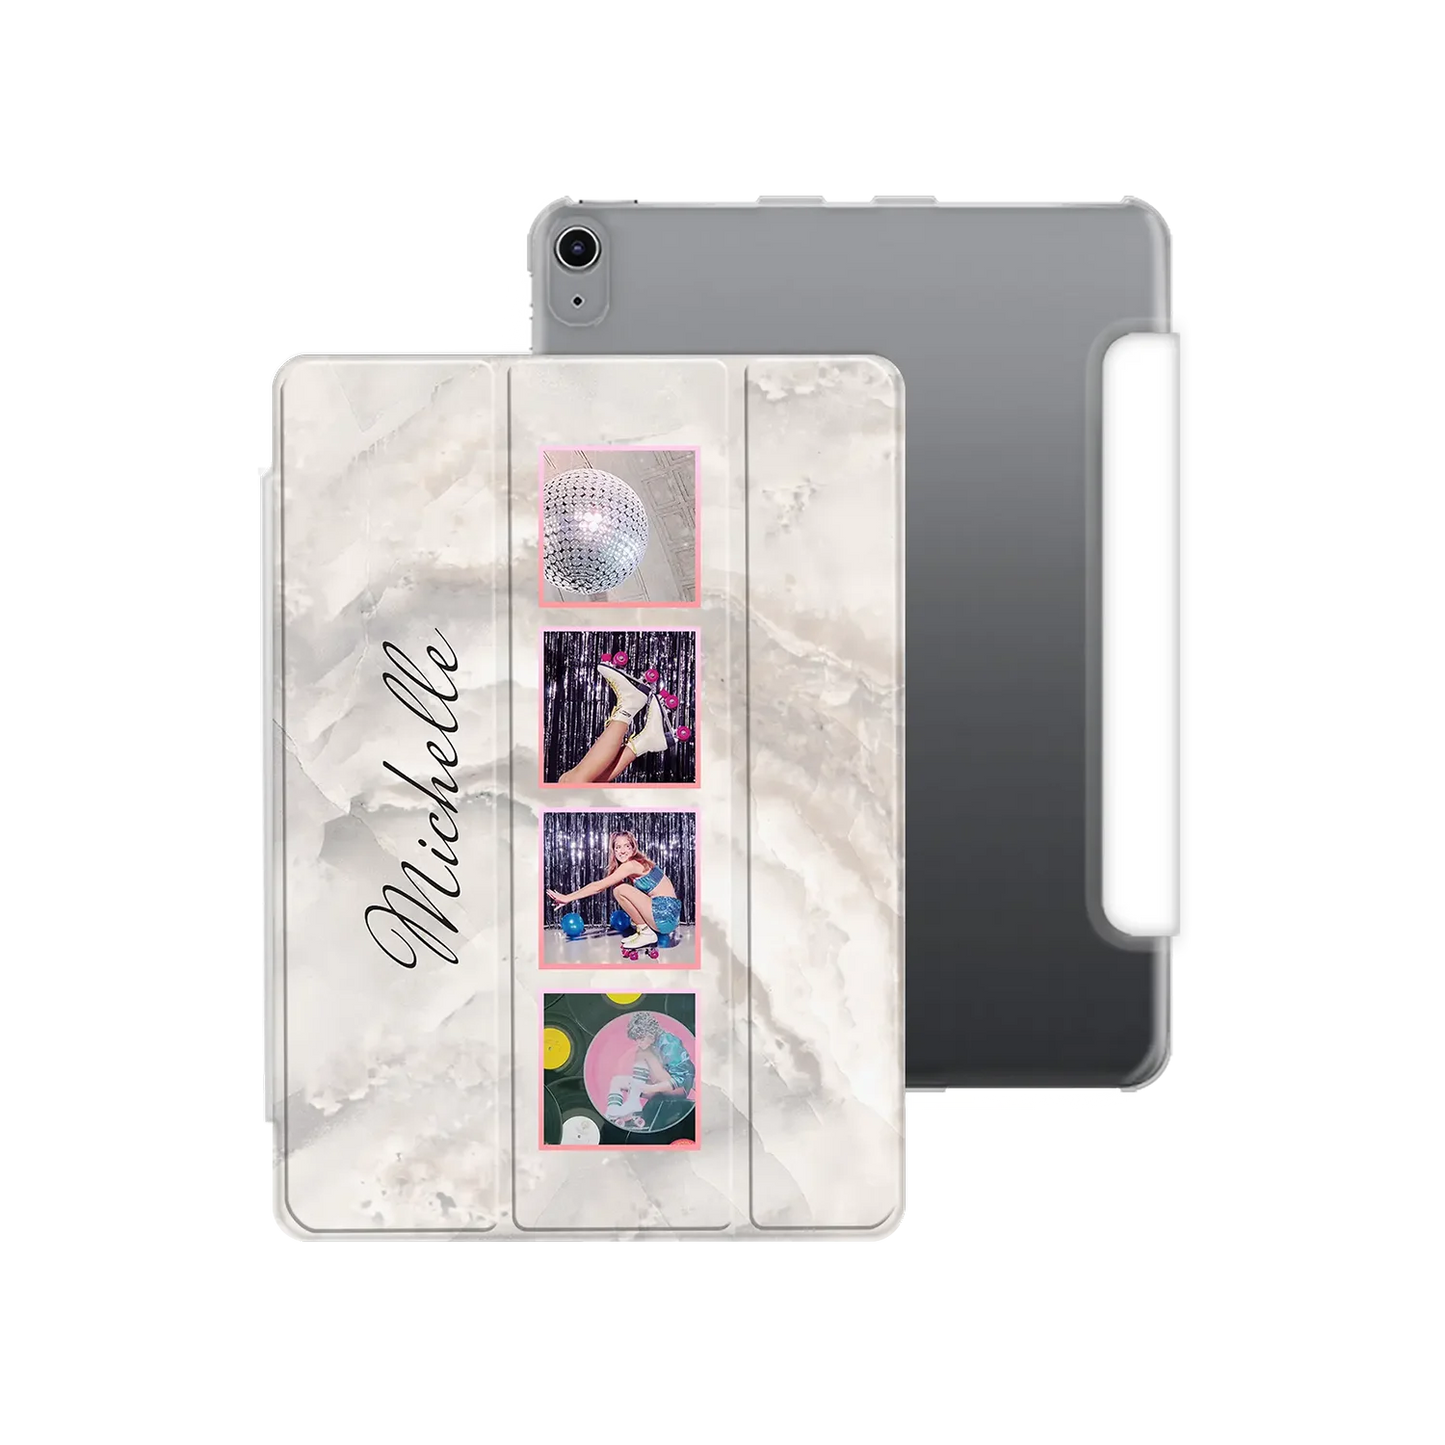 Photo Booth - Personalised iPad Case